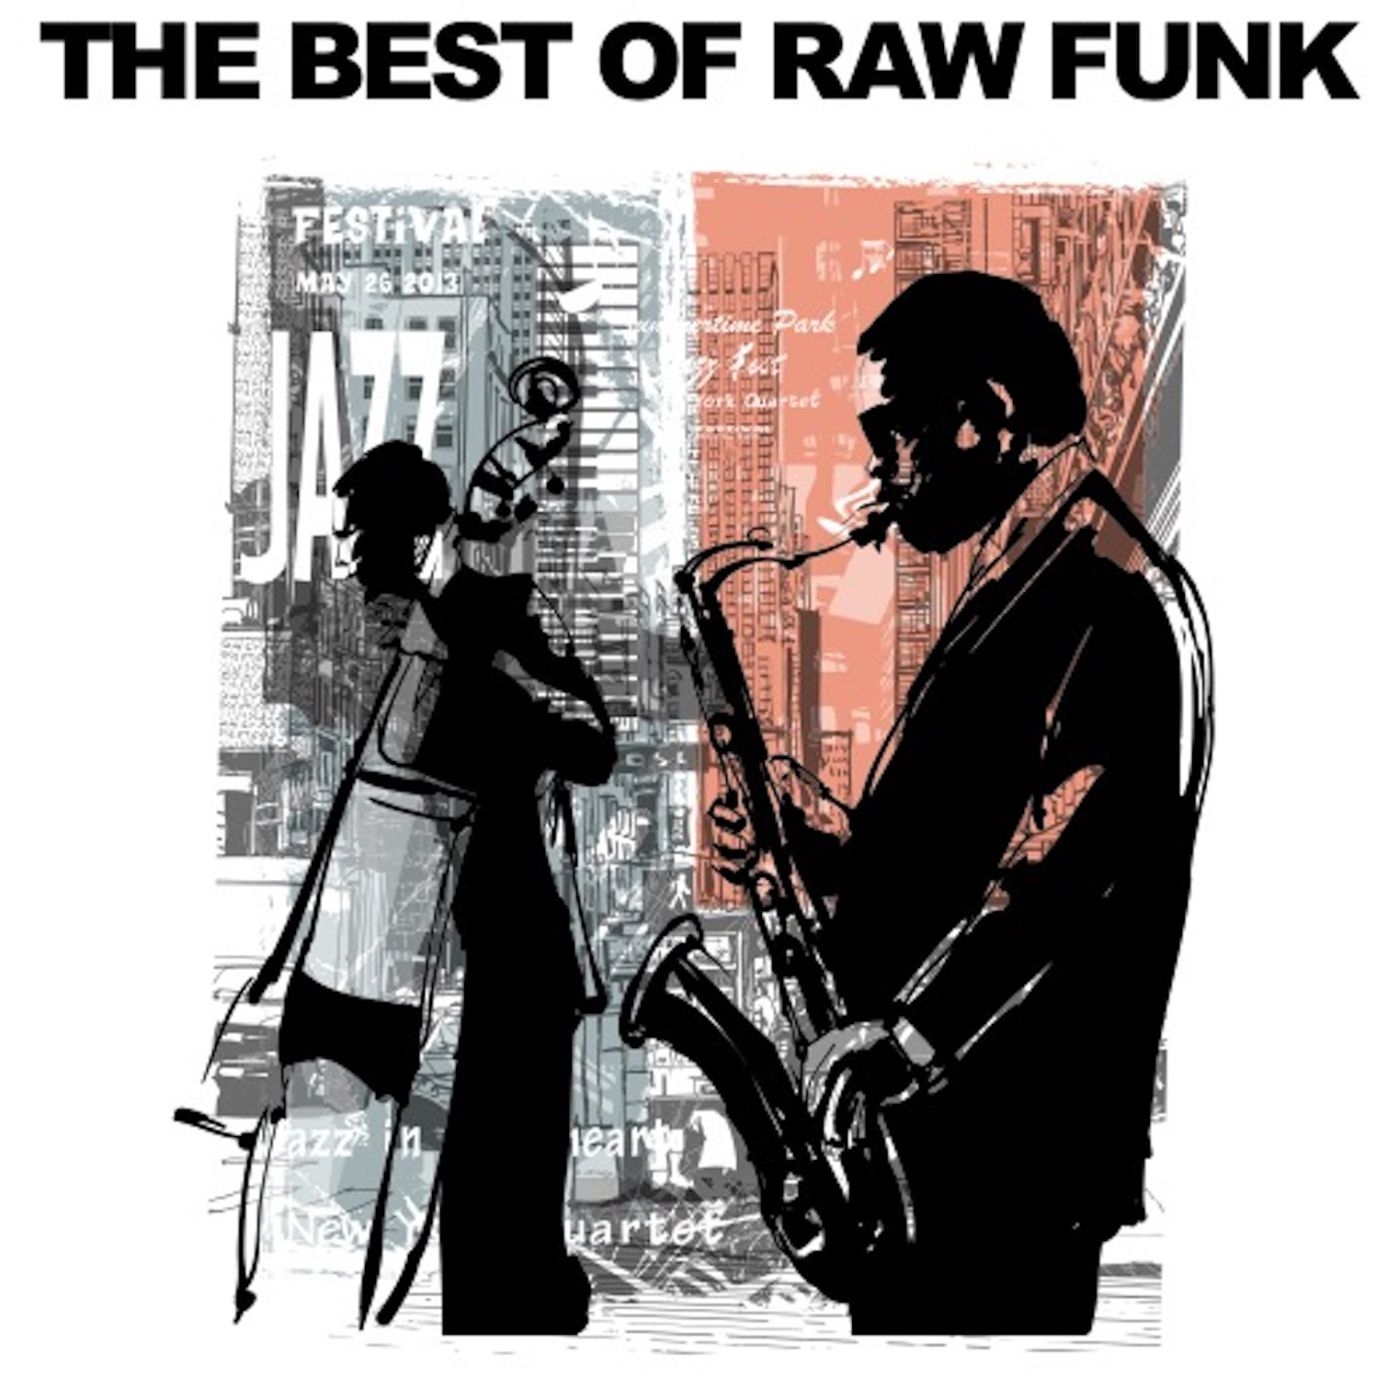 The Best of Raw Funk